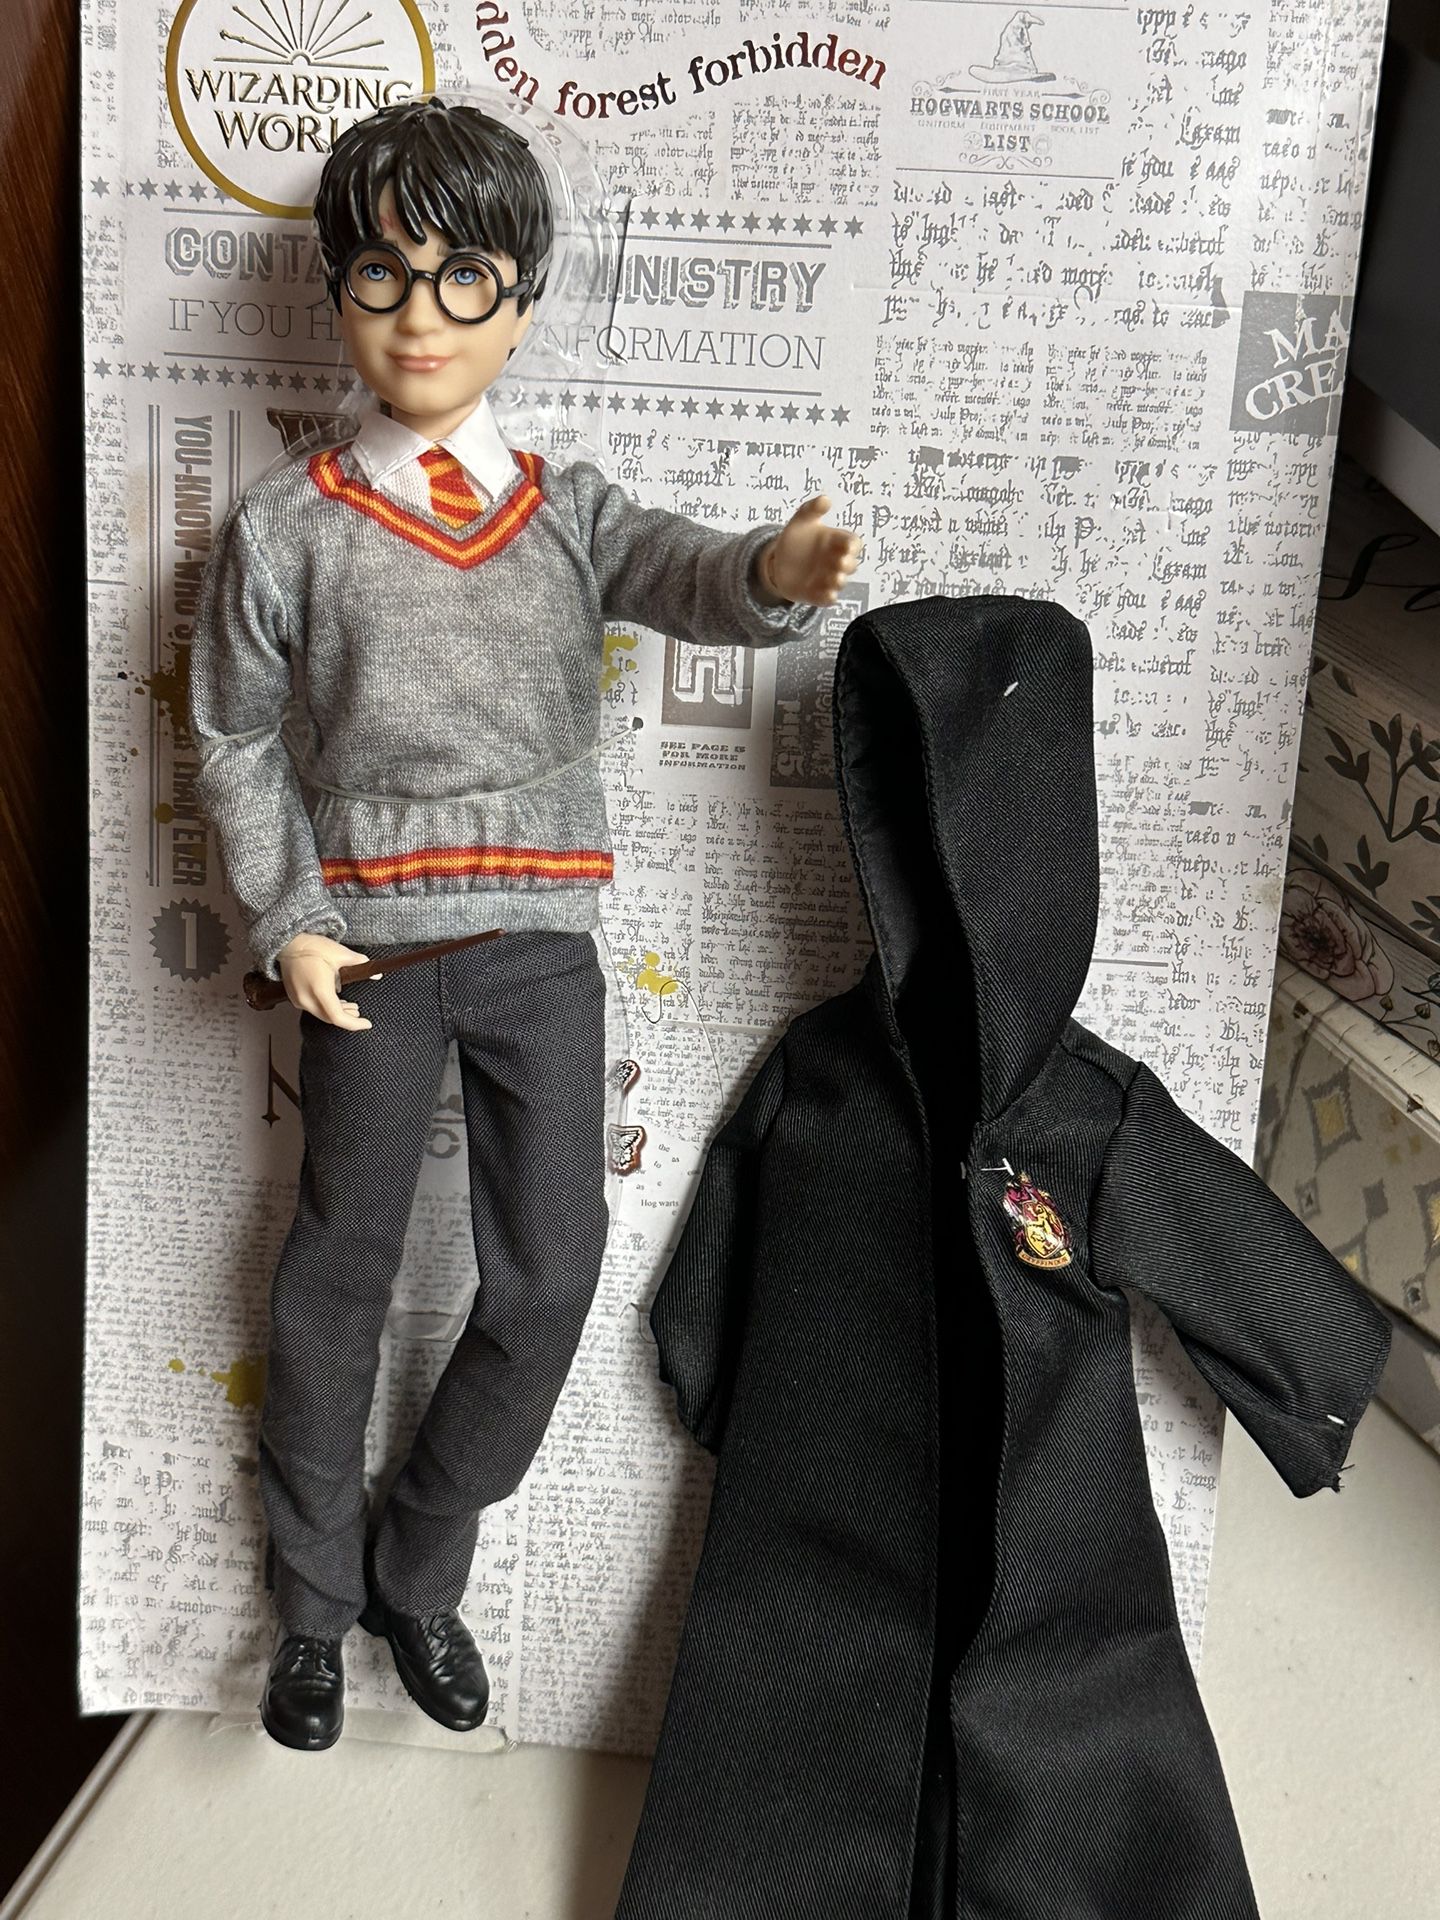 Harry Potter articulated doll 10”